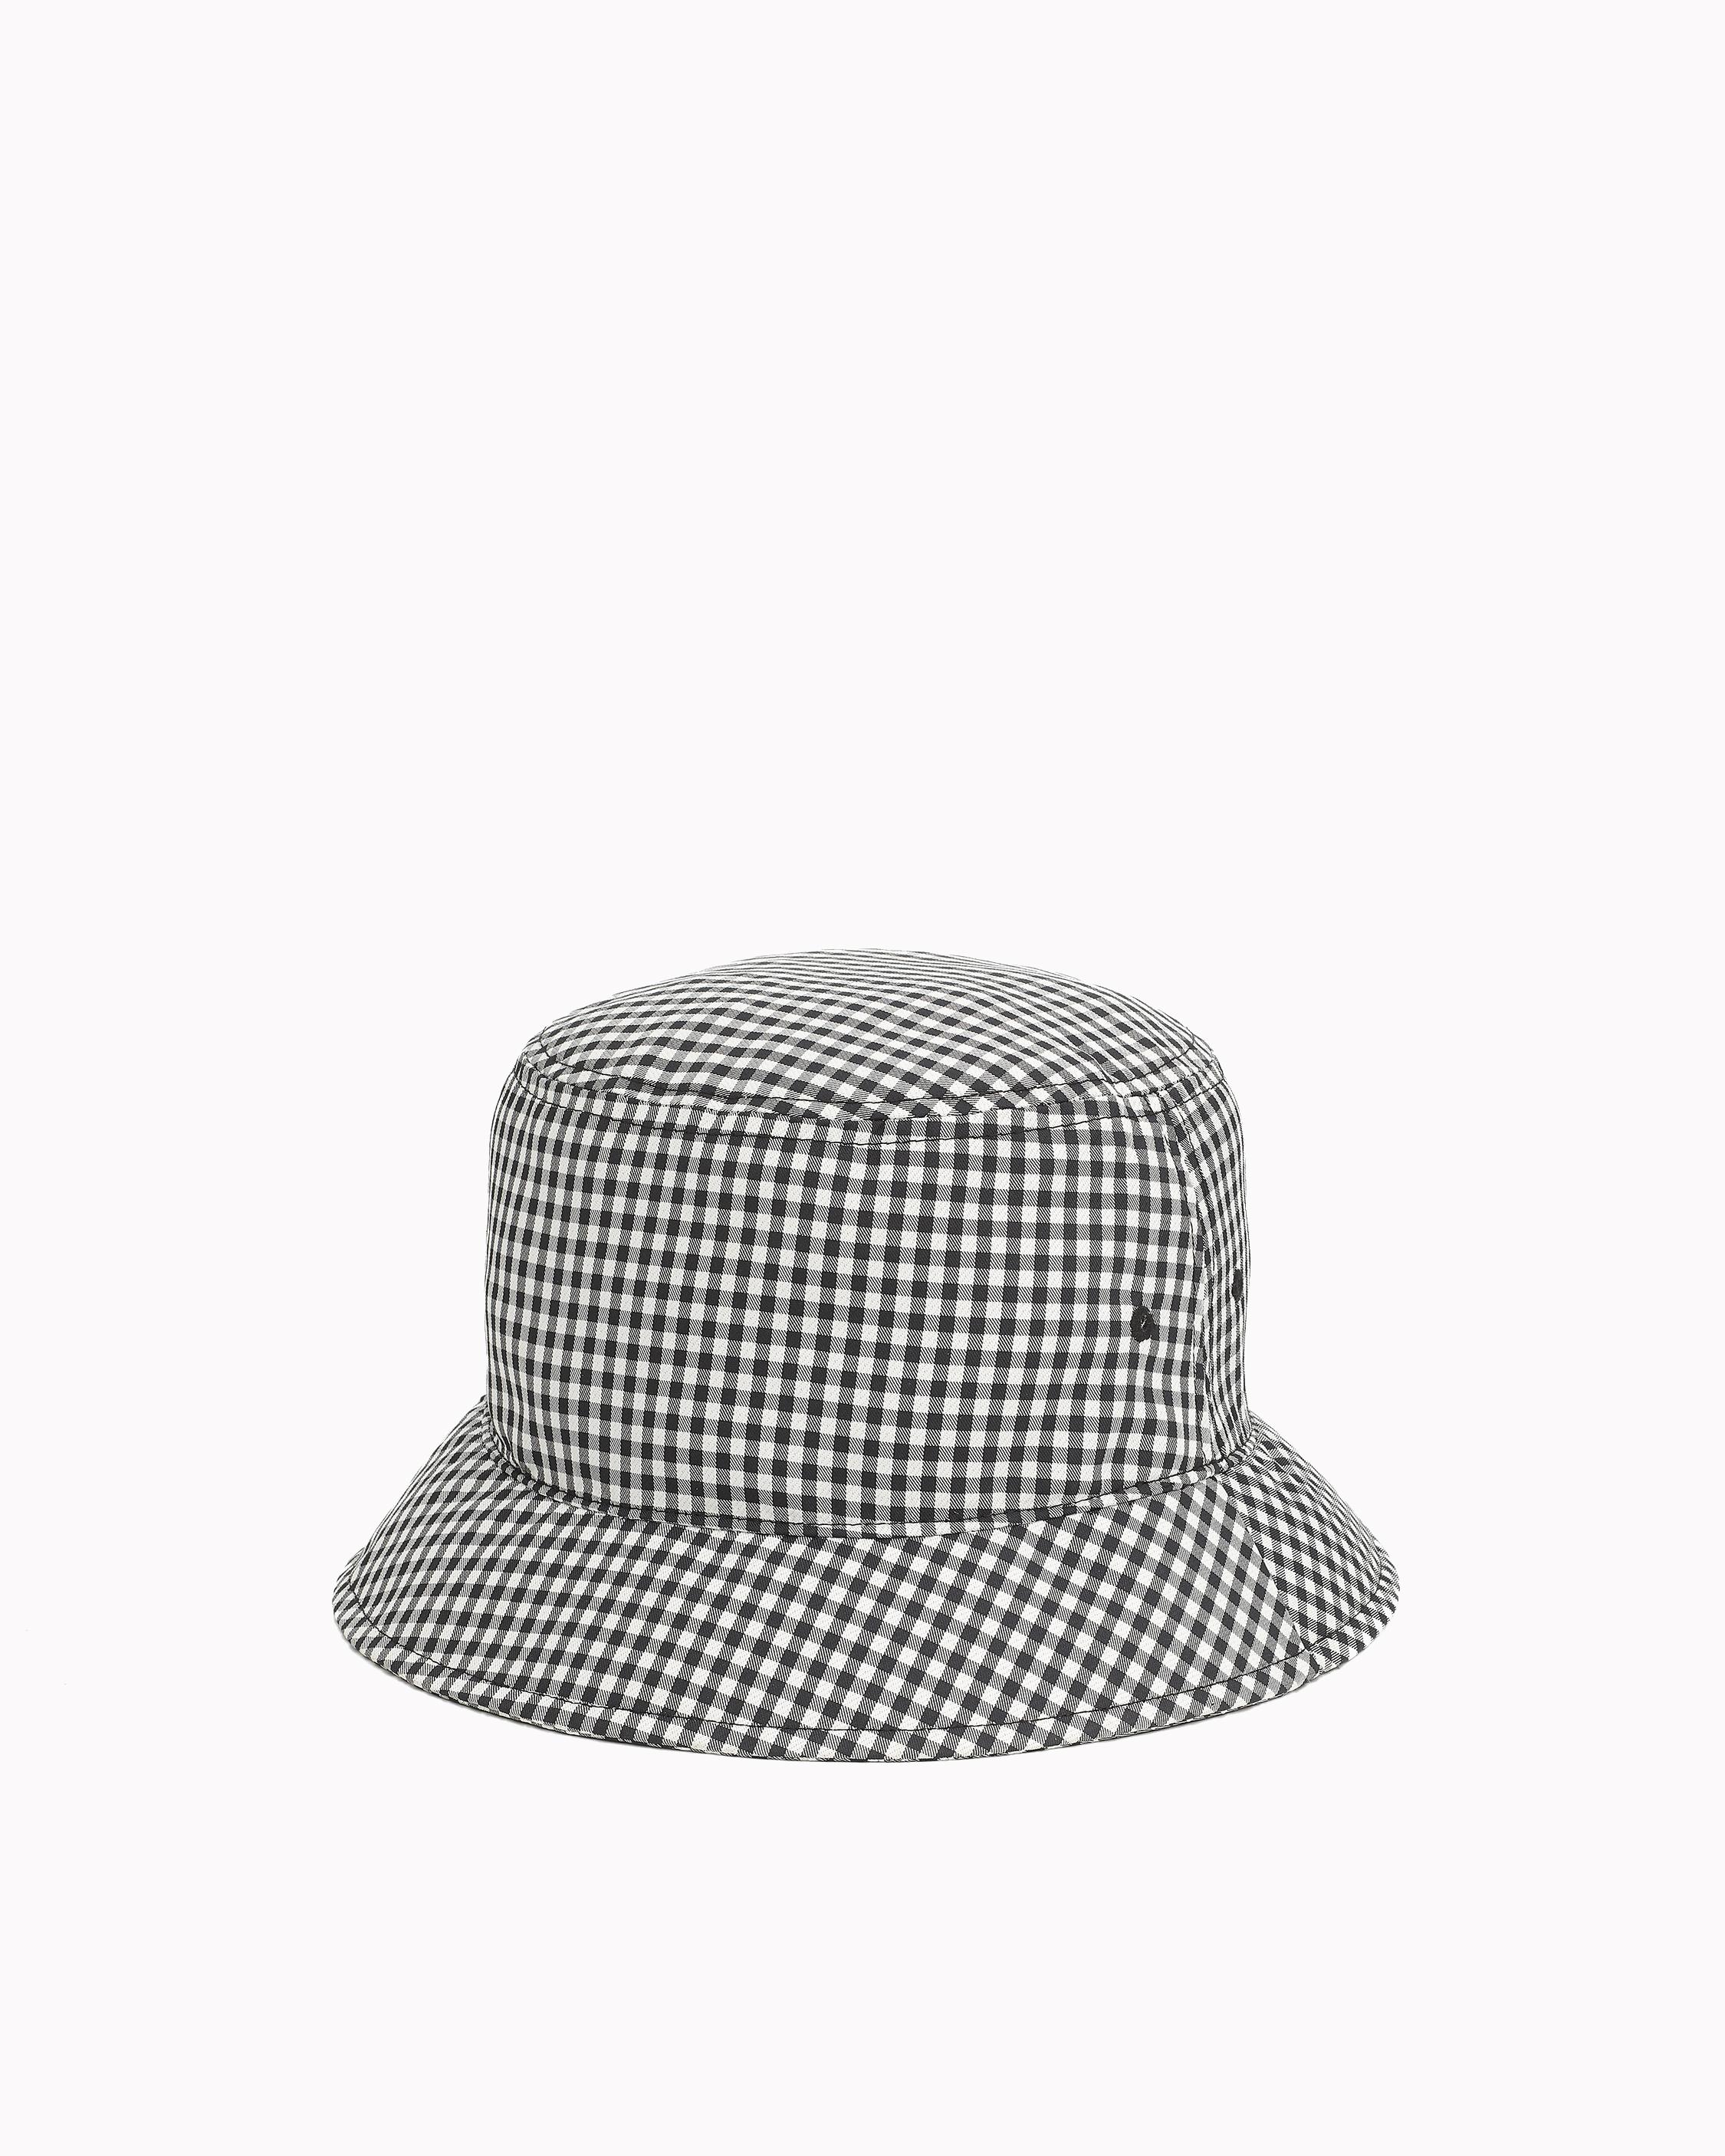 Accessories: Fedoras to Sunglasses to Scarves with Urban Style | rag & bone